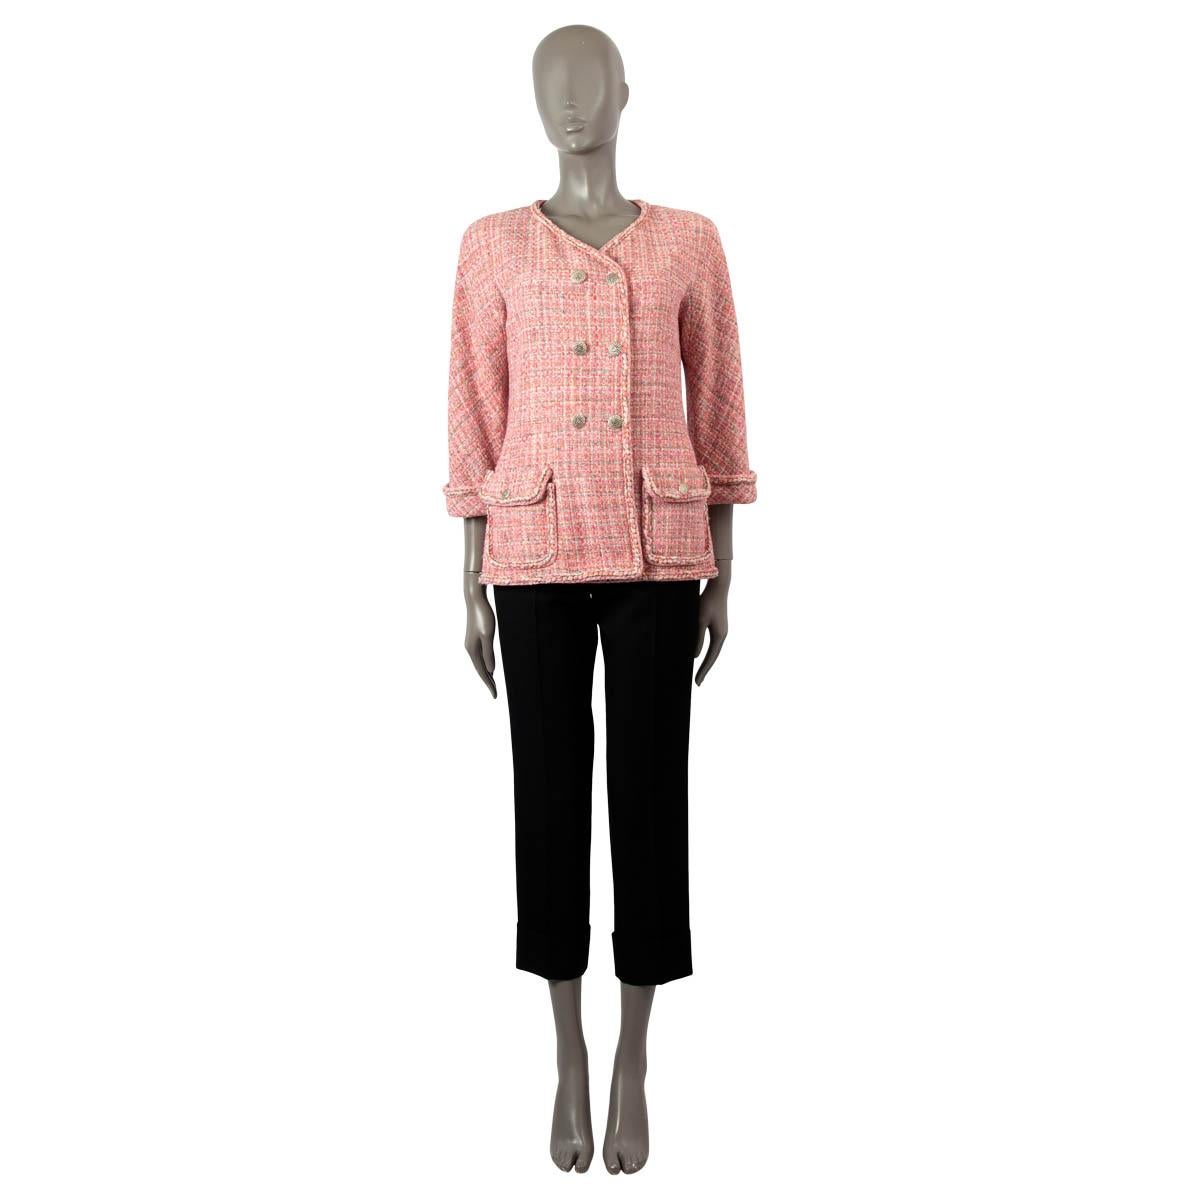 100% authentic Chanel double-breasted tweed jacket in pink and multicolor nylon (81%), polyurthan (6%), acrylic (5%), rayon (3%), cotton (3%), mohair (1%) and wool (1%). Features braided trim and 3/4 sleeves and flap pockets on the front. Lined in